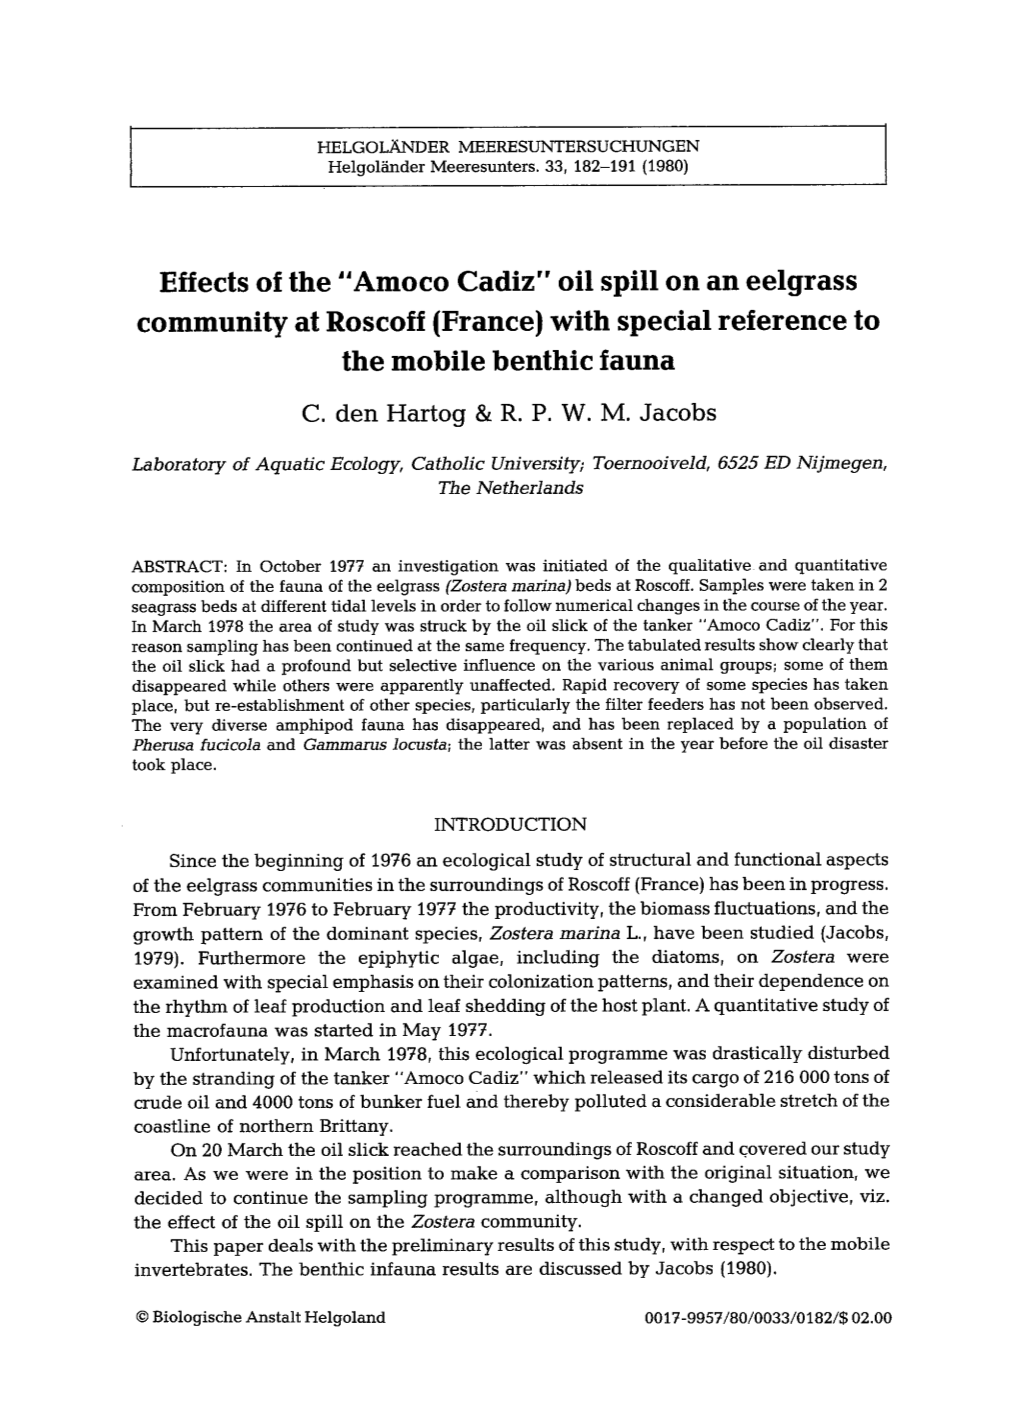 Effects of the “Amoco Cadiz” Oil Spill on an Eelgrass Community at Roscoff